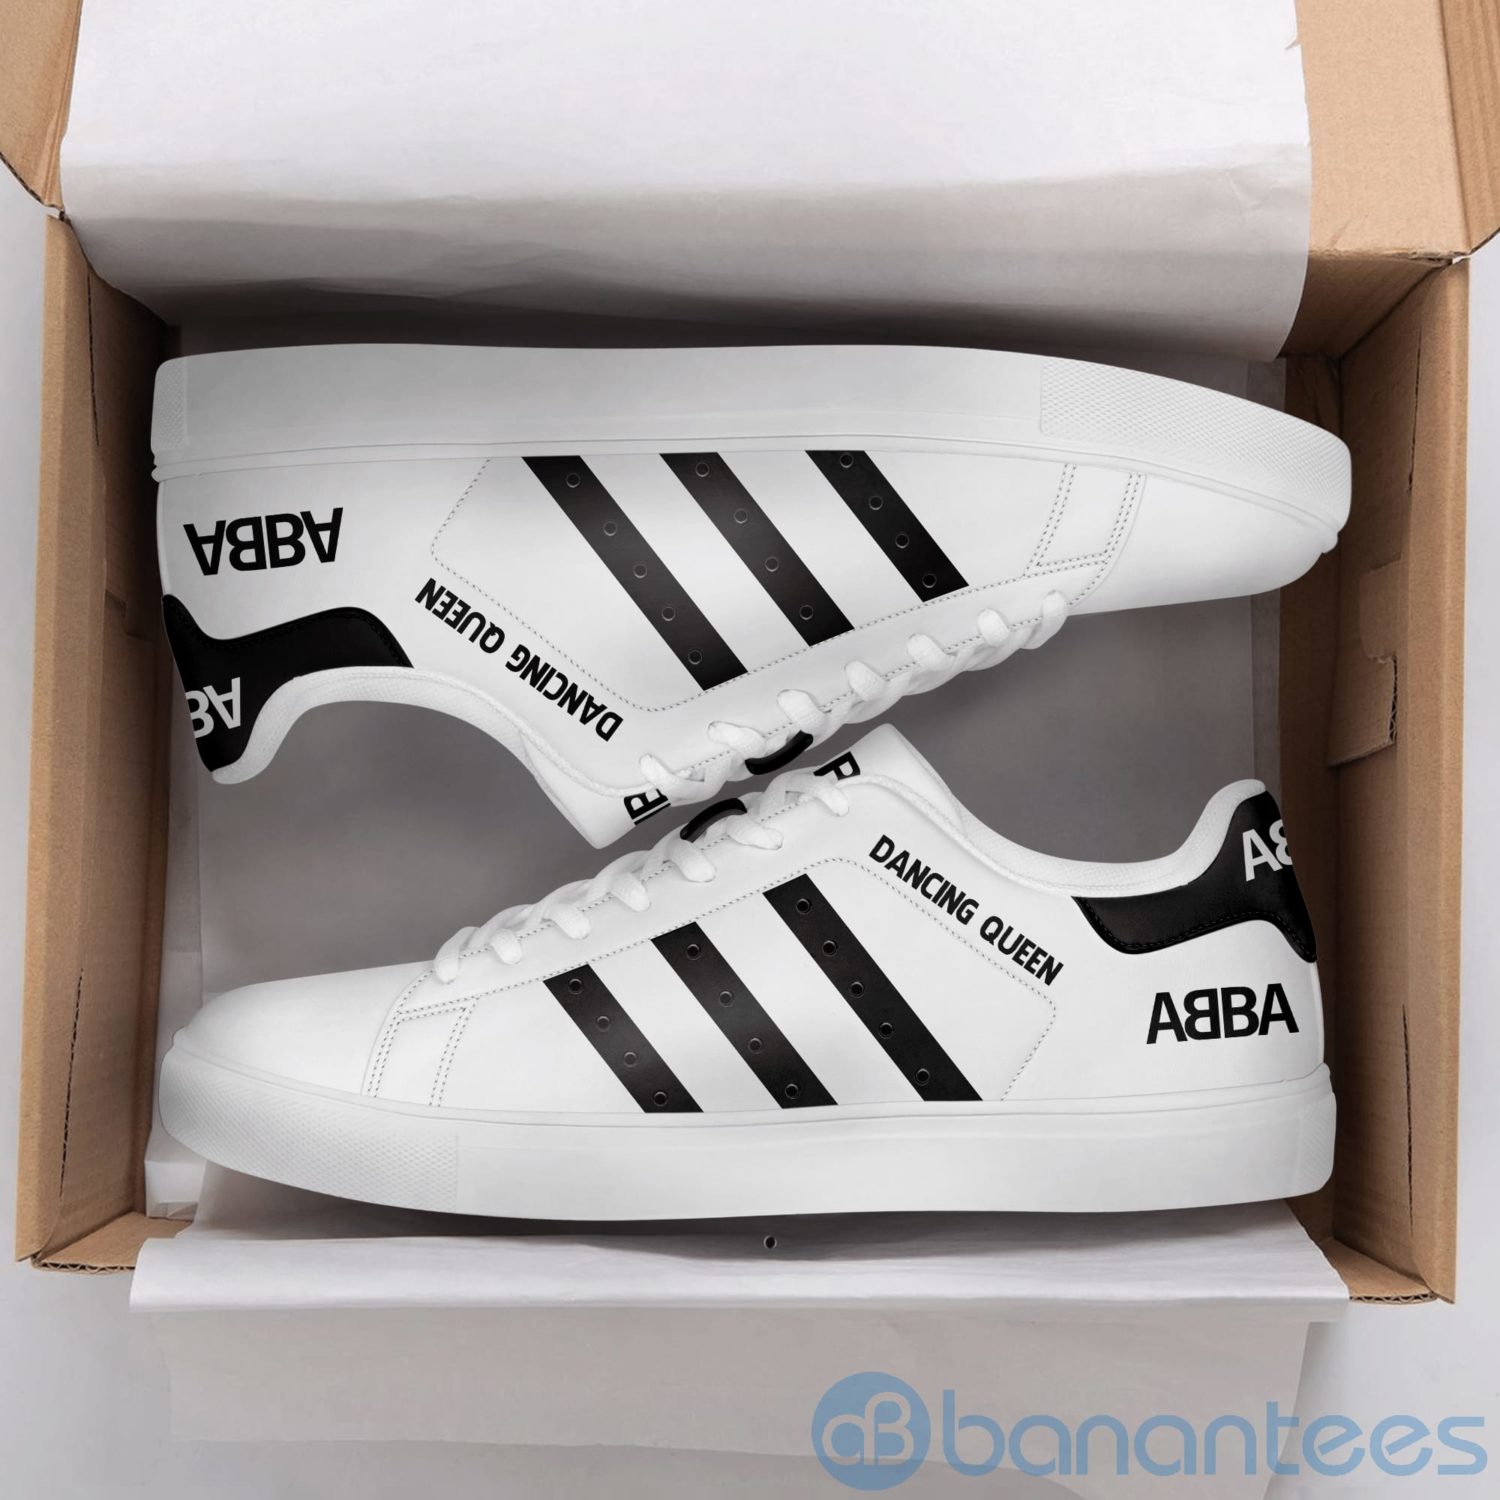 Abba Dancing Queen Black Striped White Low Top Skate Shoes